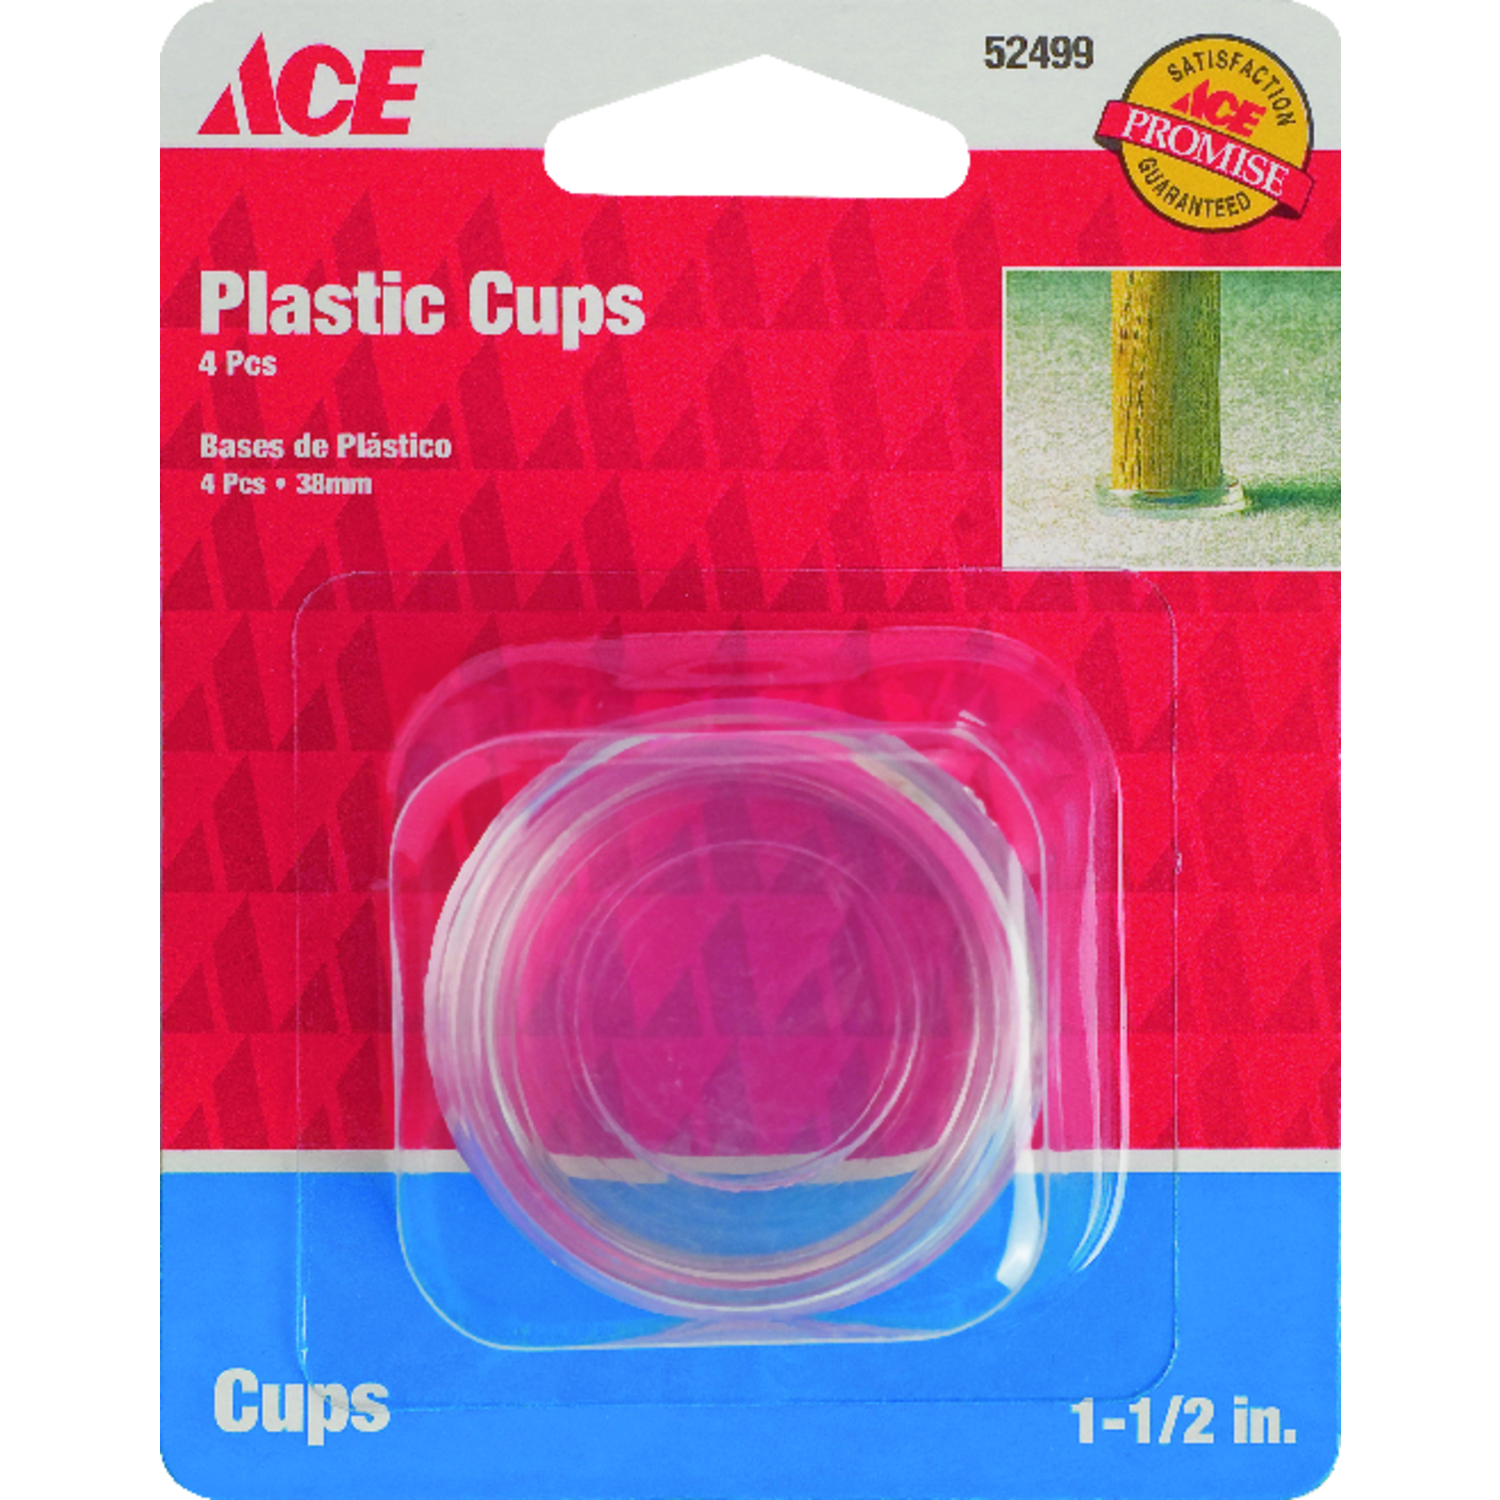 Ace Plastic Caster Cup Clear Round 1-1/2 in. W 4 pk